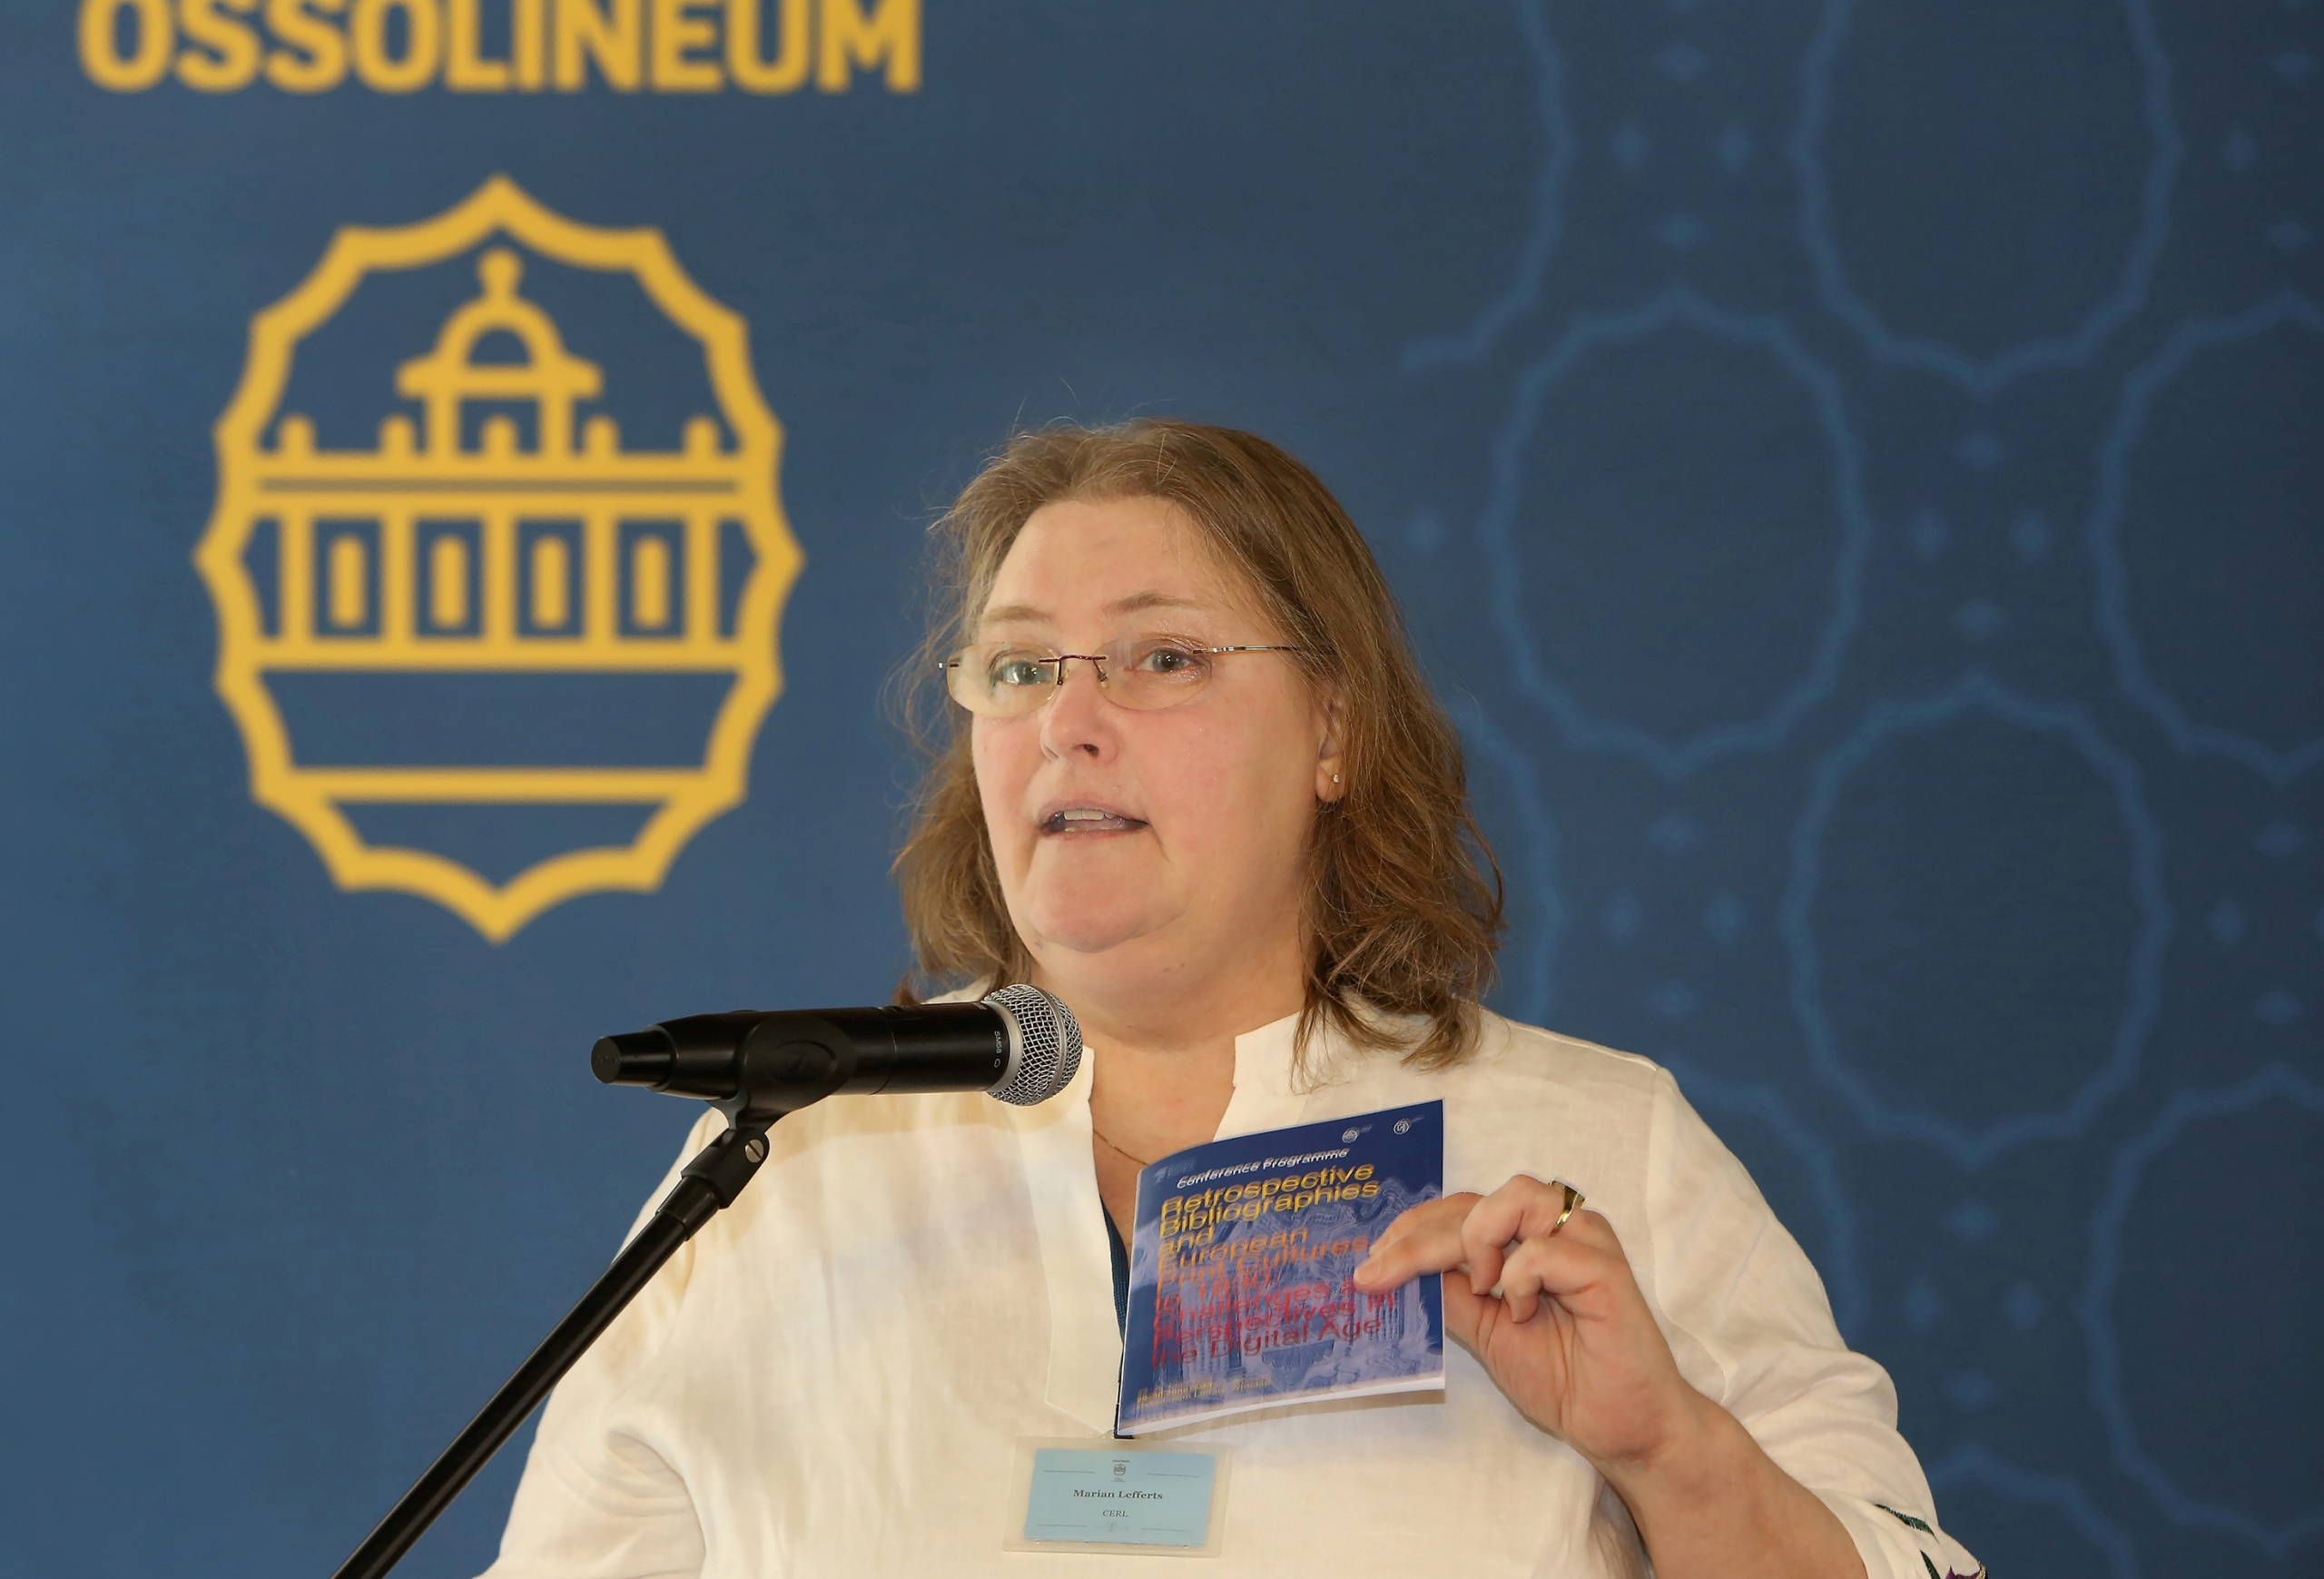 3)Marian Lefferts, Executive Manager at the Consortium of European Research Libraries (CERL).